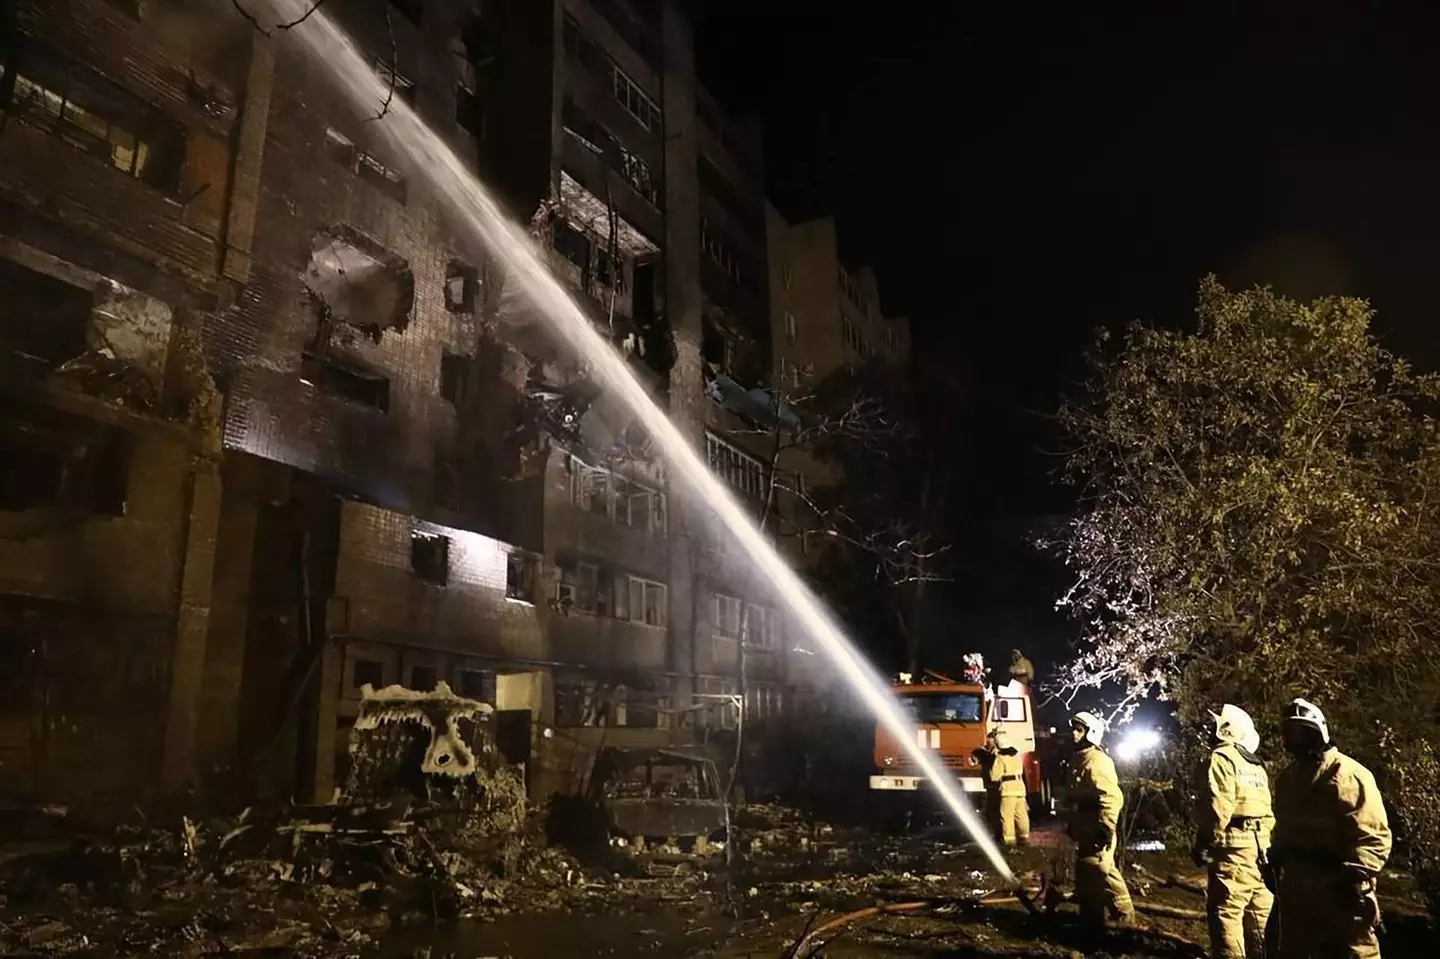 The burnt out apartment building in Yeysk was set ablaze in the plane crash.